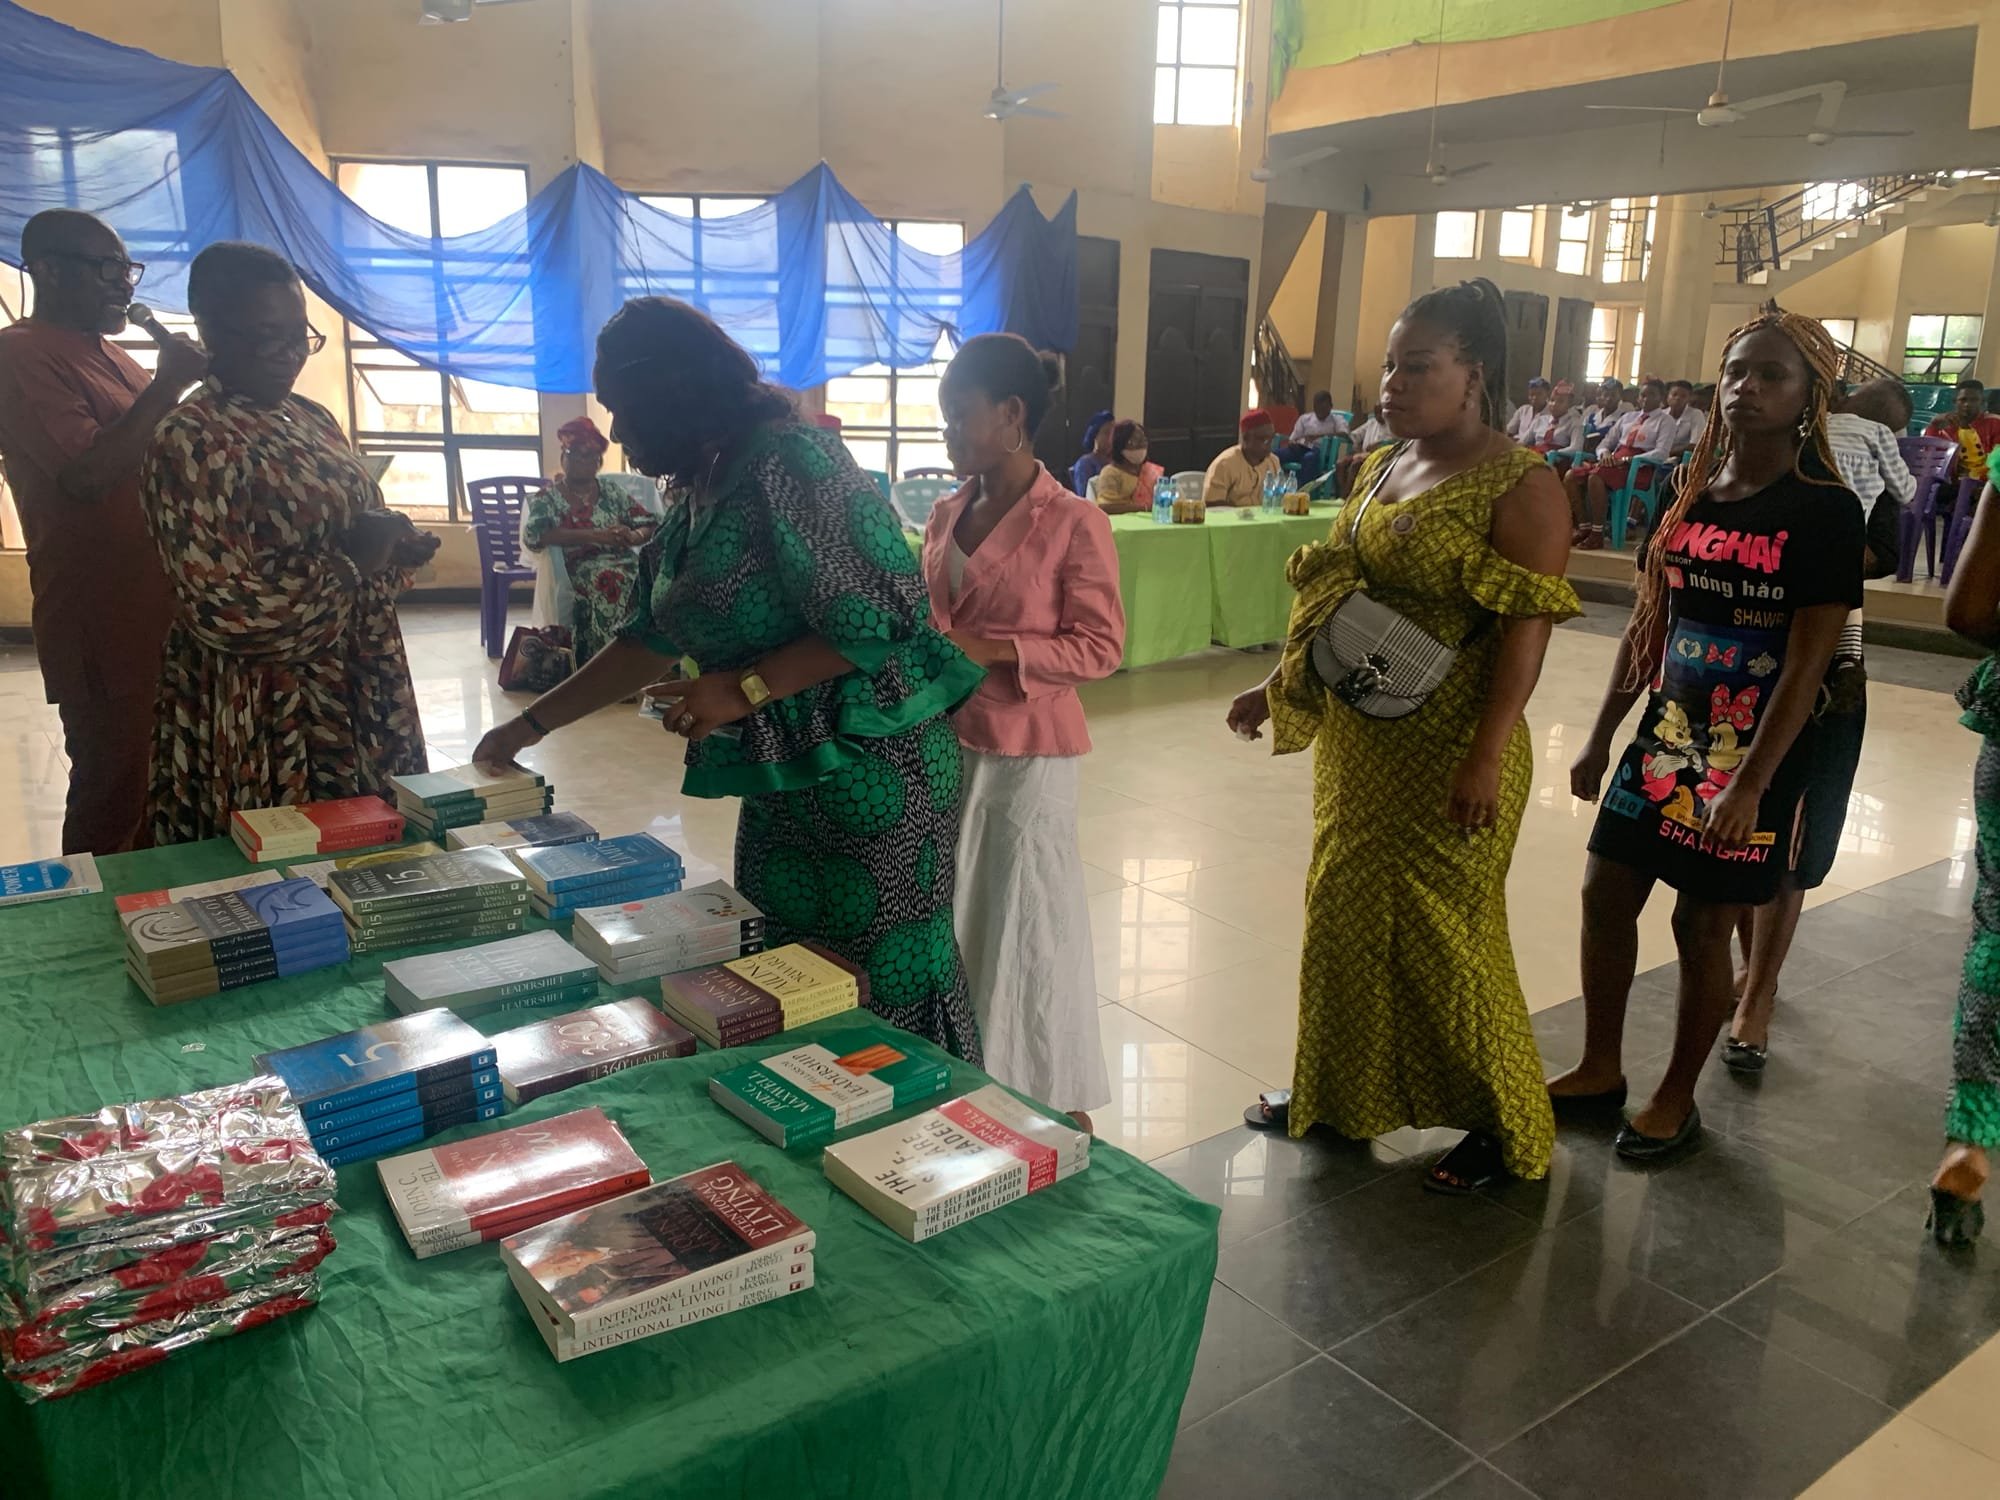 The presentation of some book titles to the teachers